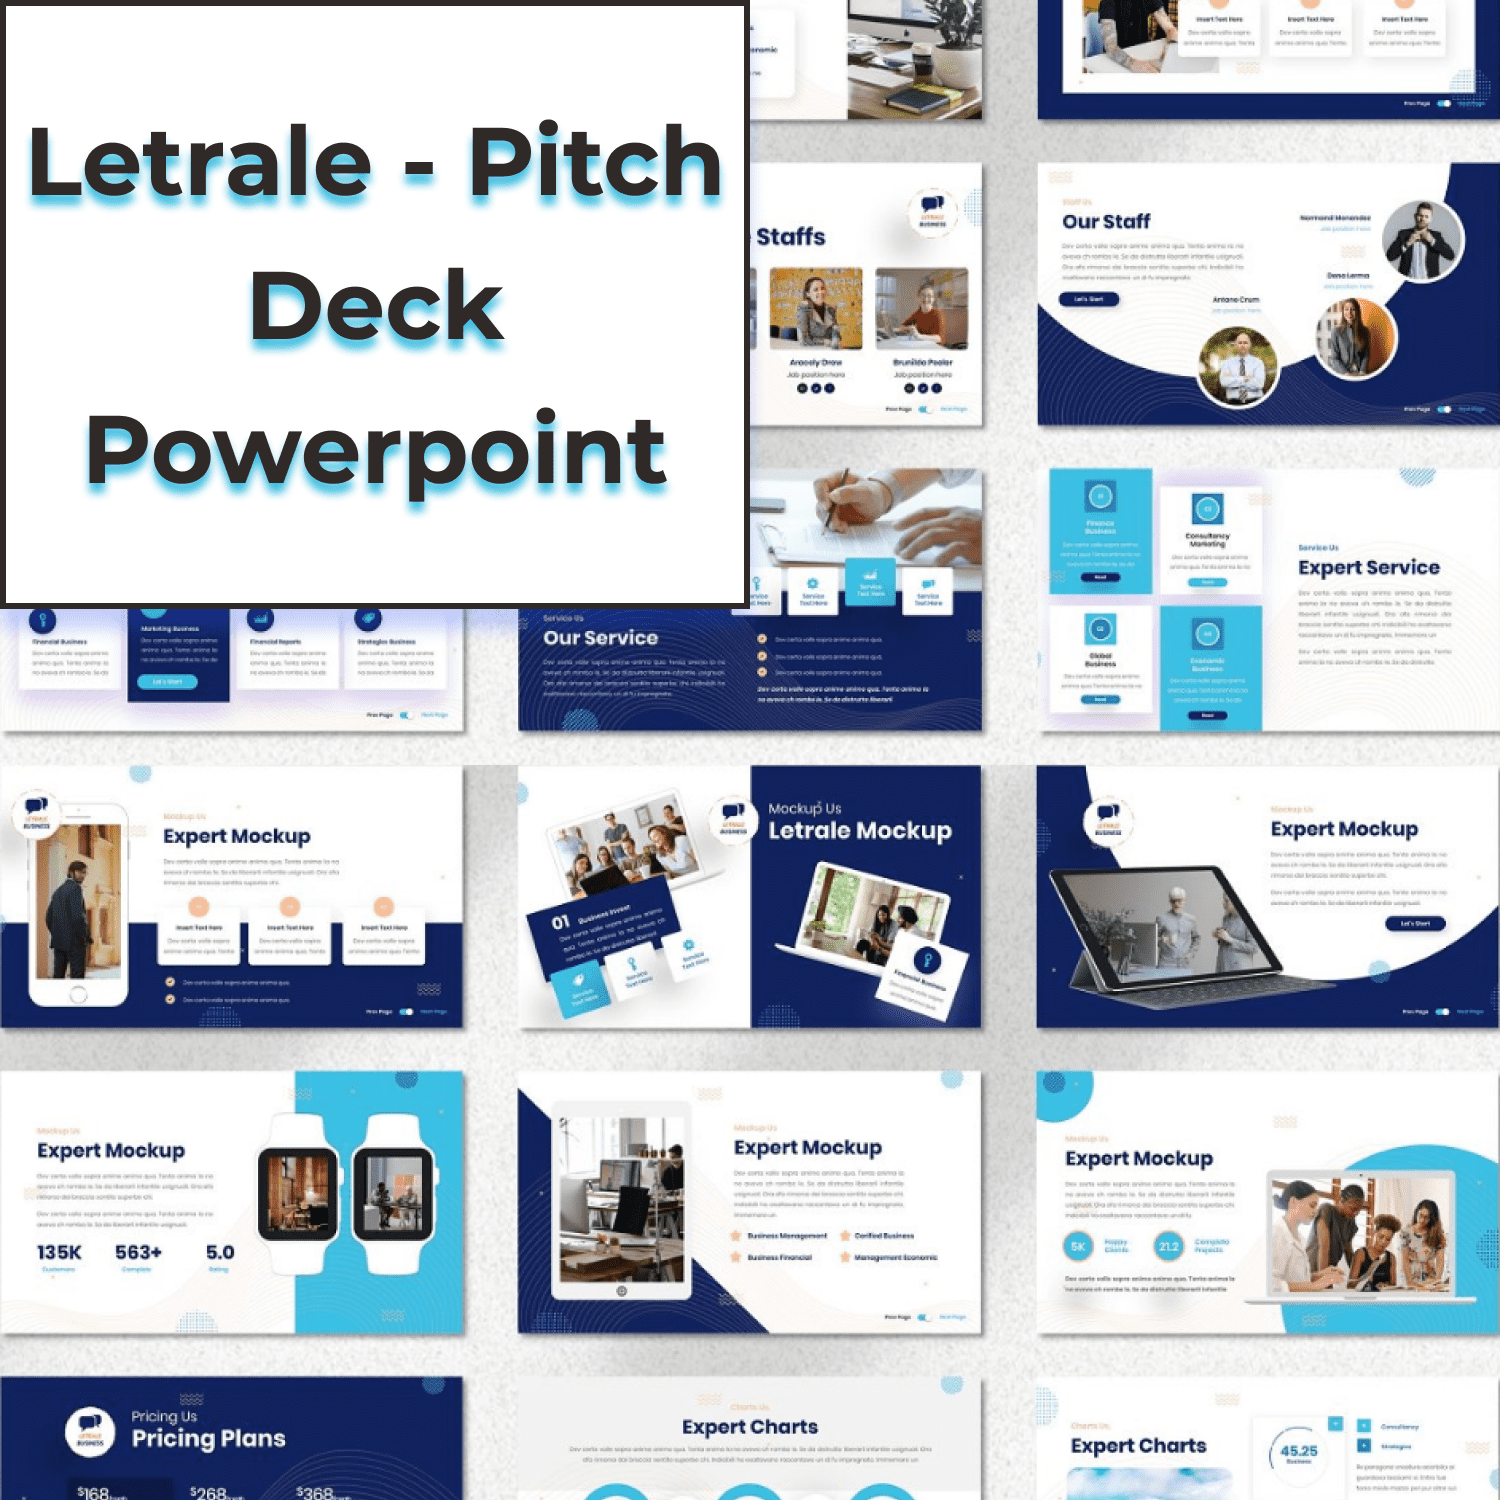 Letrale - Pitch Deck Powerpoint cover image.